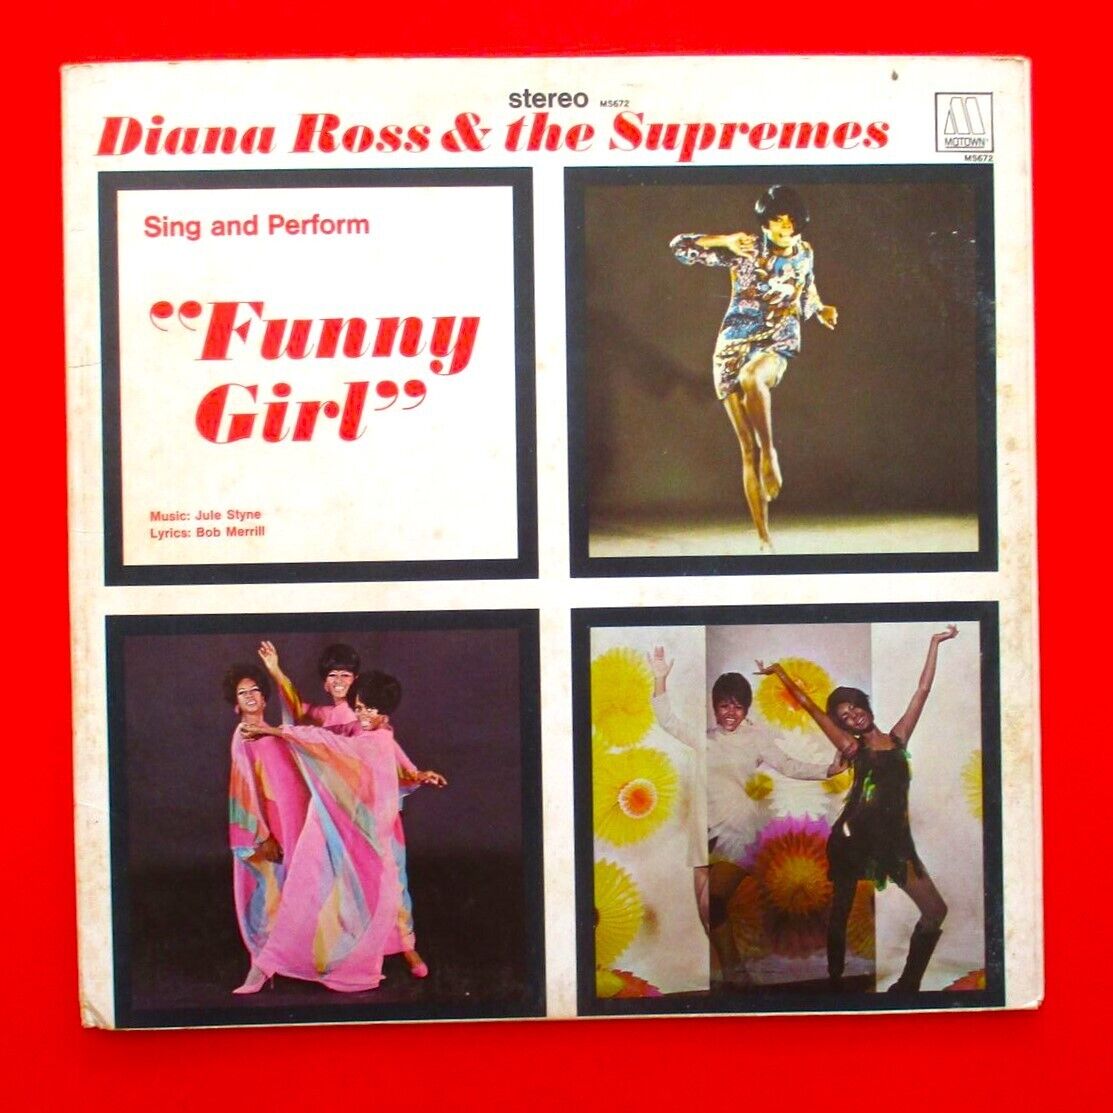 Diana Ross & The Supremes Sing And Perform "Funny Girl" Vinyl LP 1968